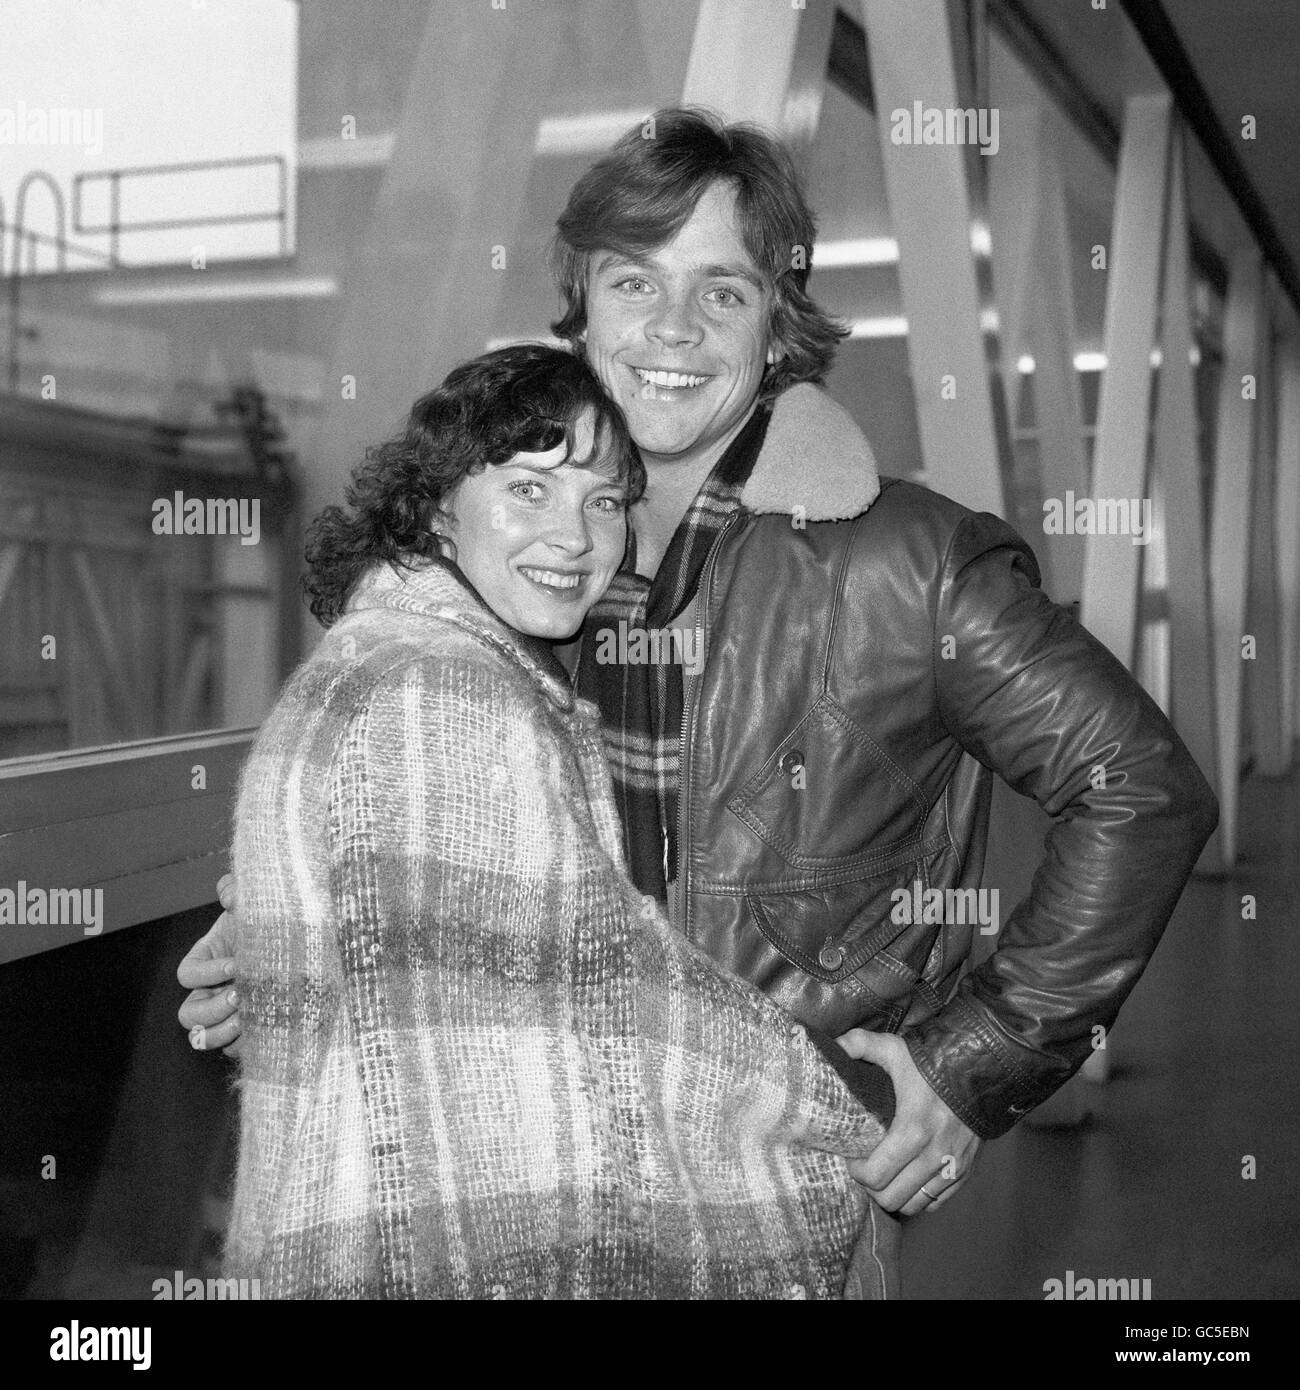 Mark Hamill, Luke Skywalker in Star Wars, at Heathrow Airport with his wife Marilou. Hamill was in London to start work on the Star Wars sequel, The Empire Strikes Back. Stock Photo